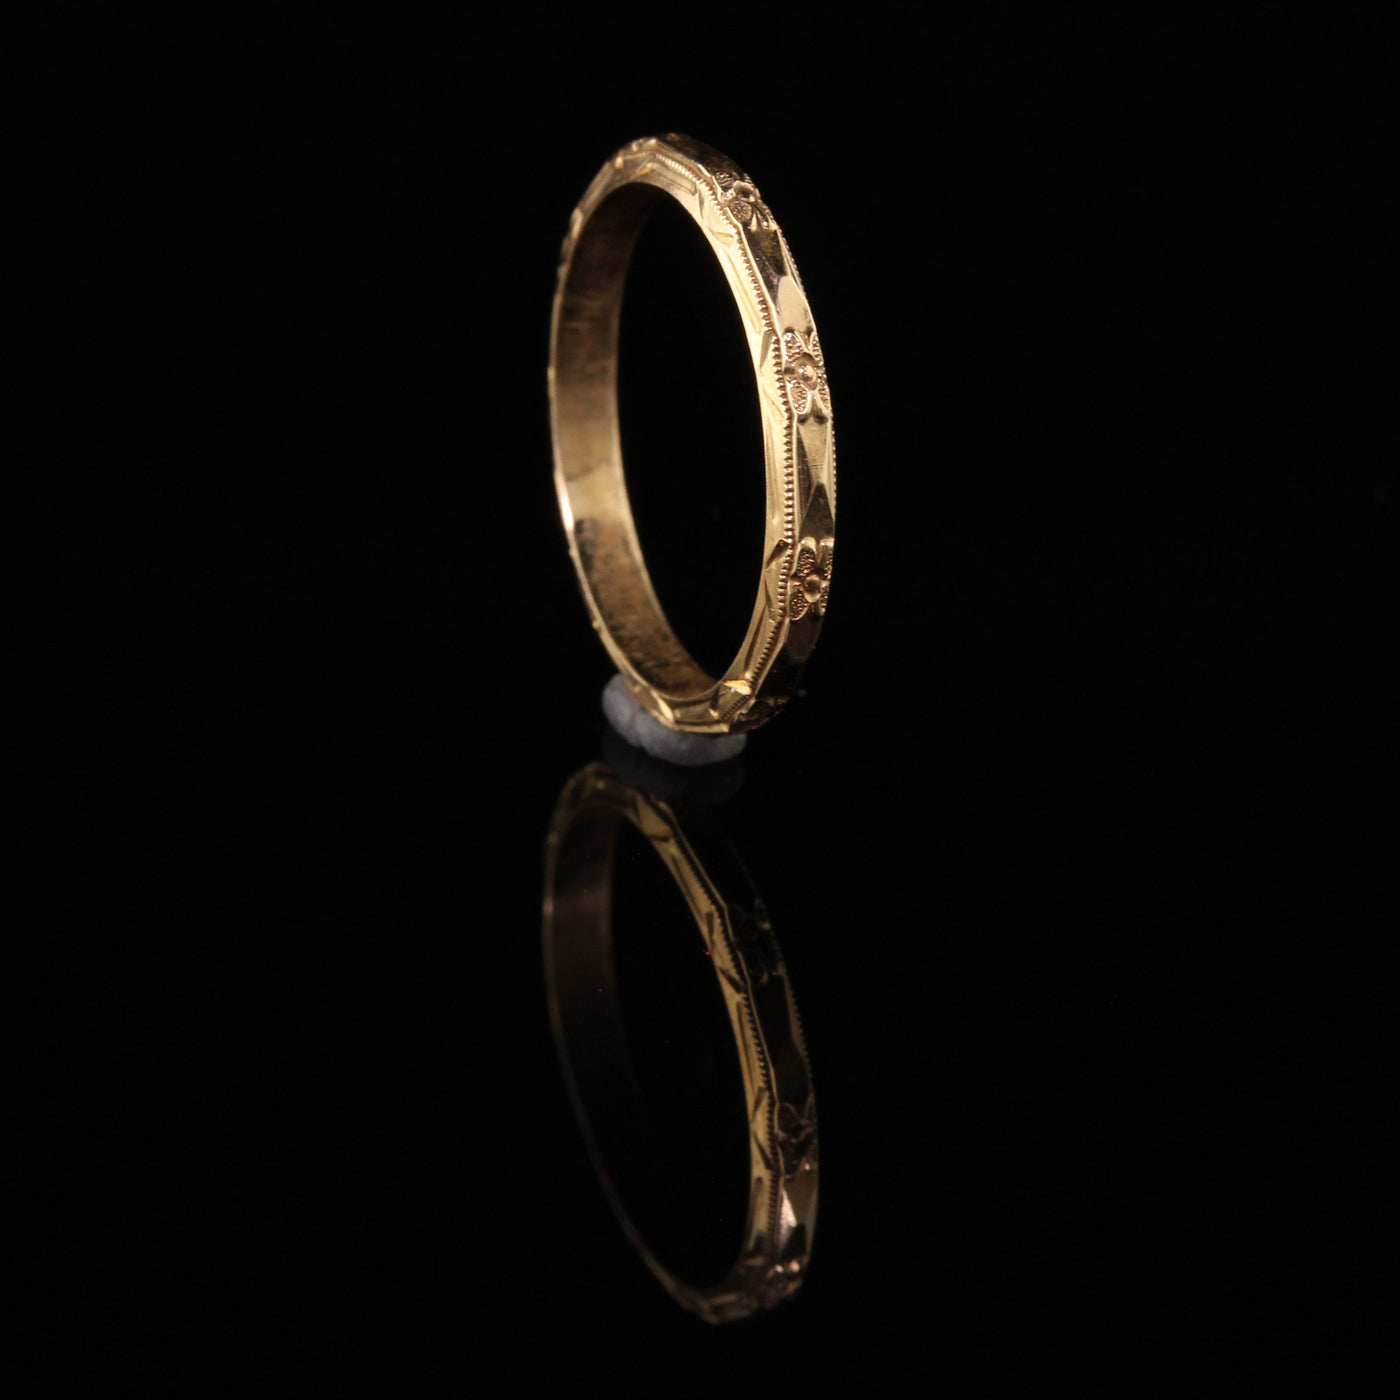 Antique Art Deco 14K Yellow Gold Engraved Wedding Band - Size 6